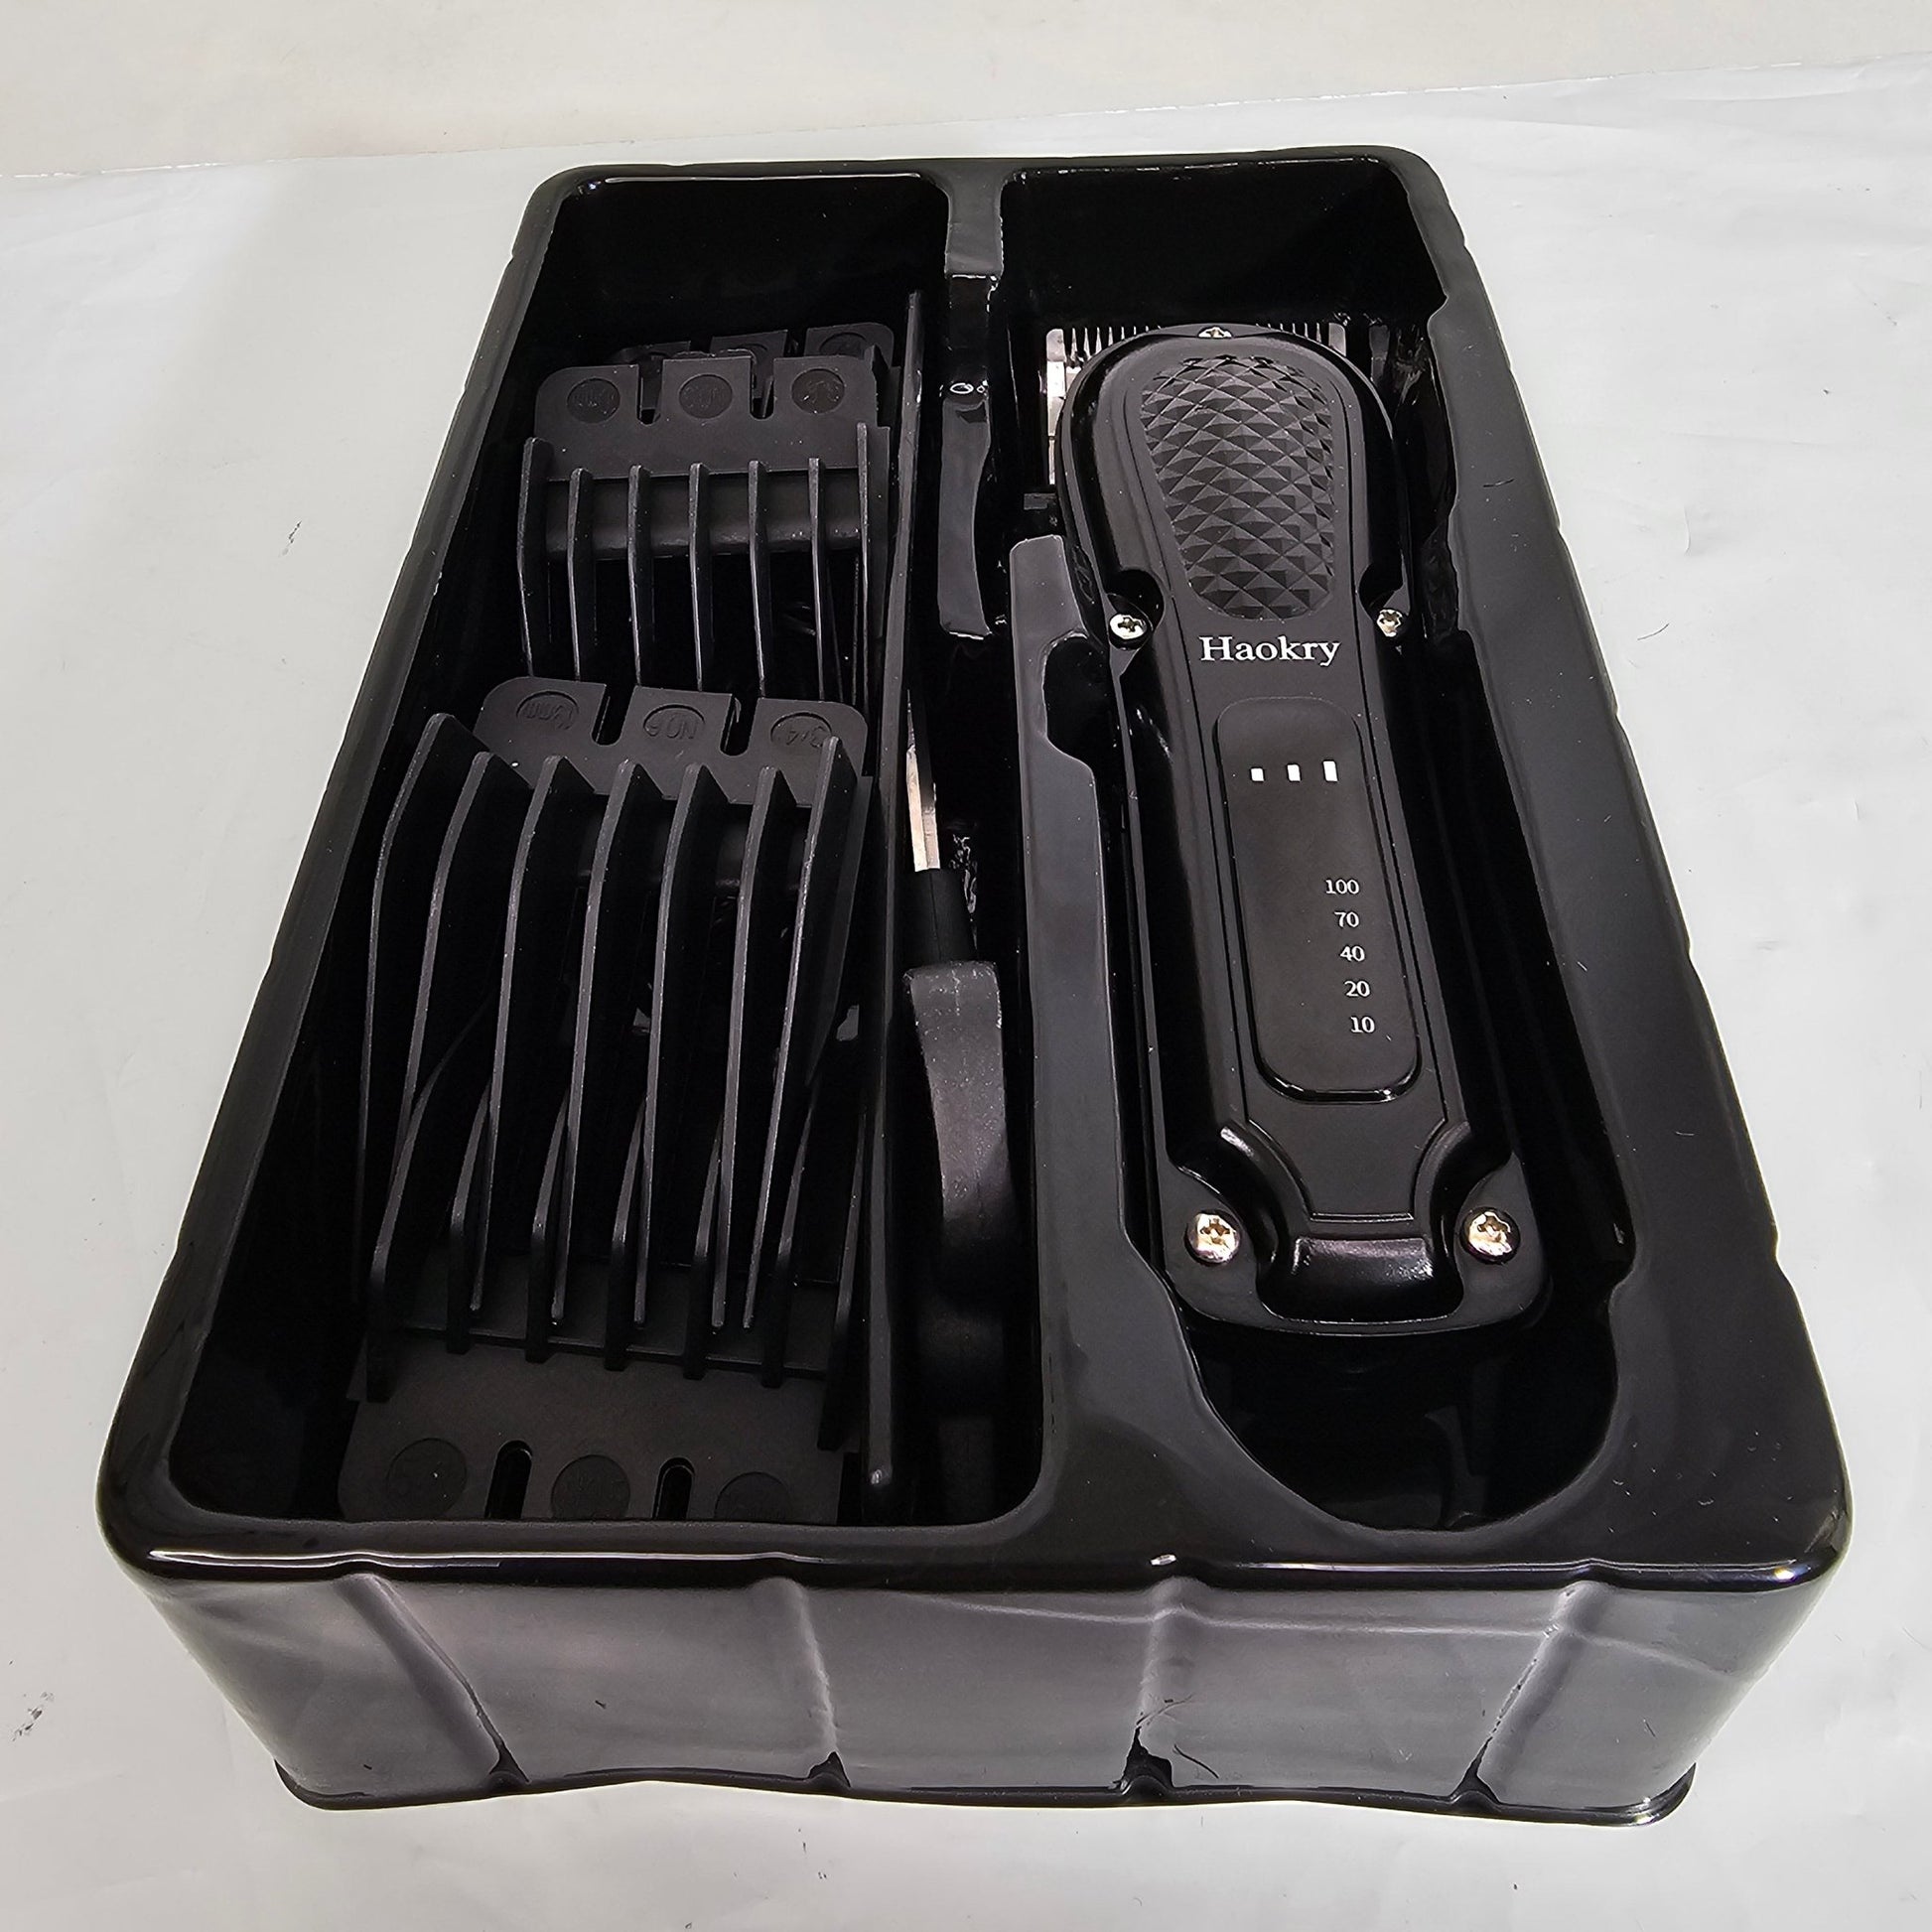 Professional electric Hair Clippers For Men Haokry - DQ Distribution